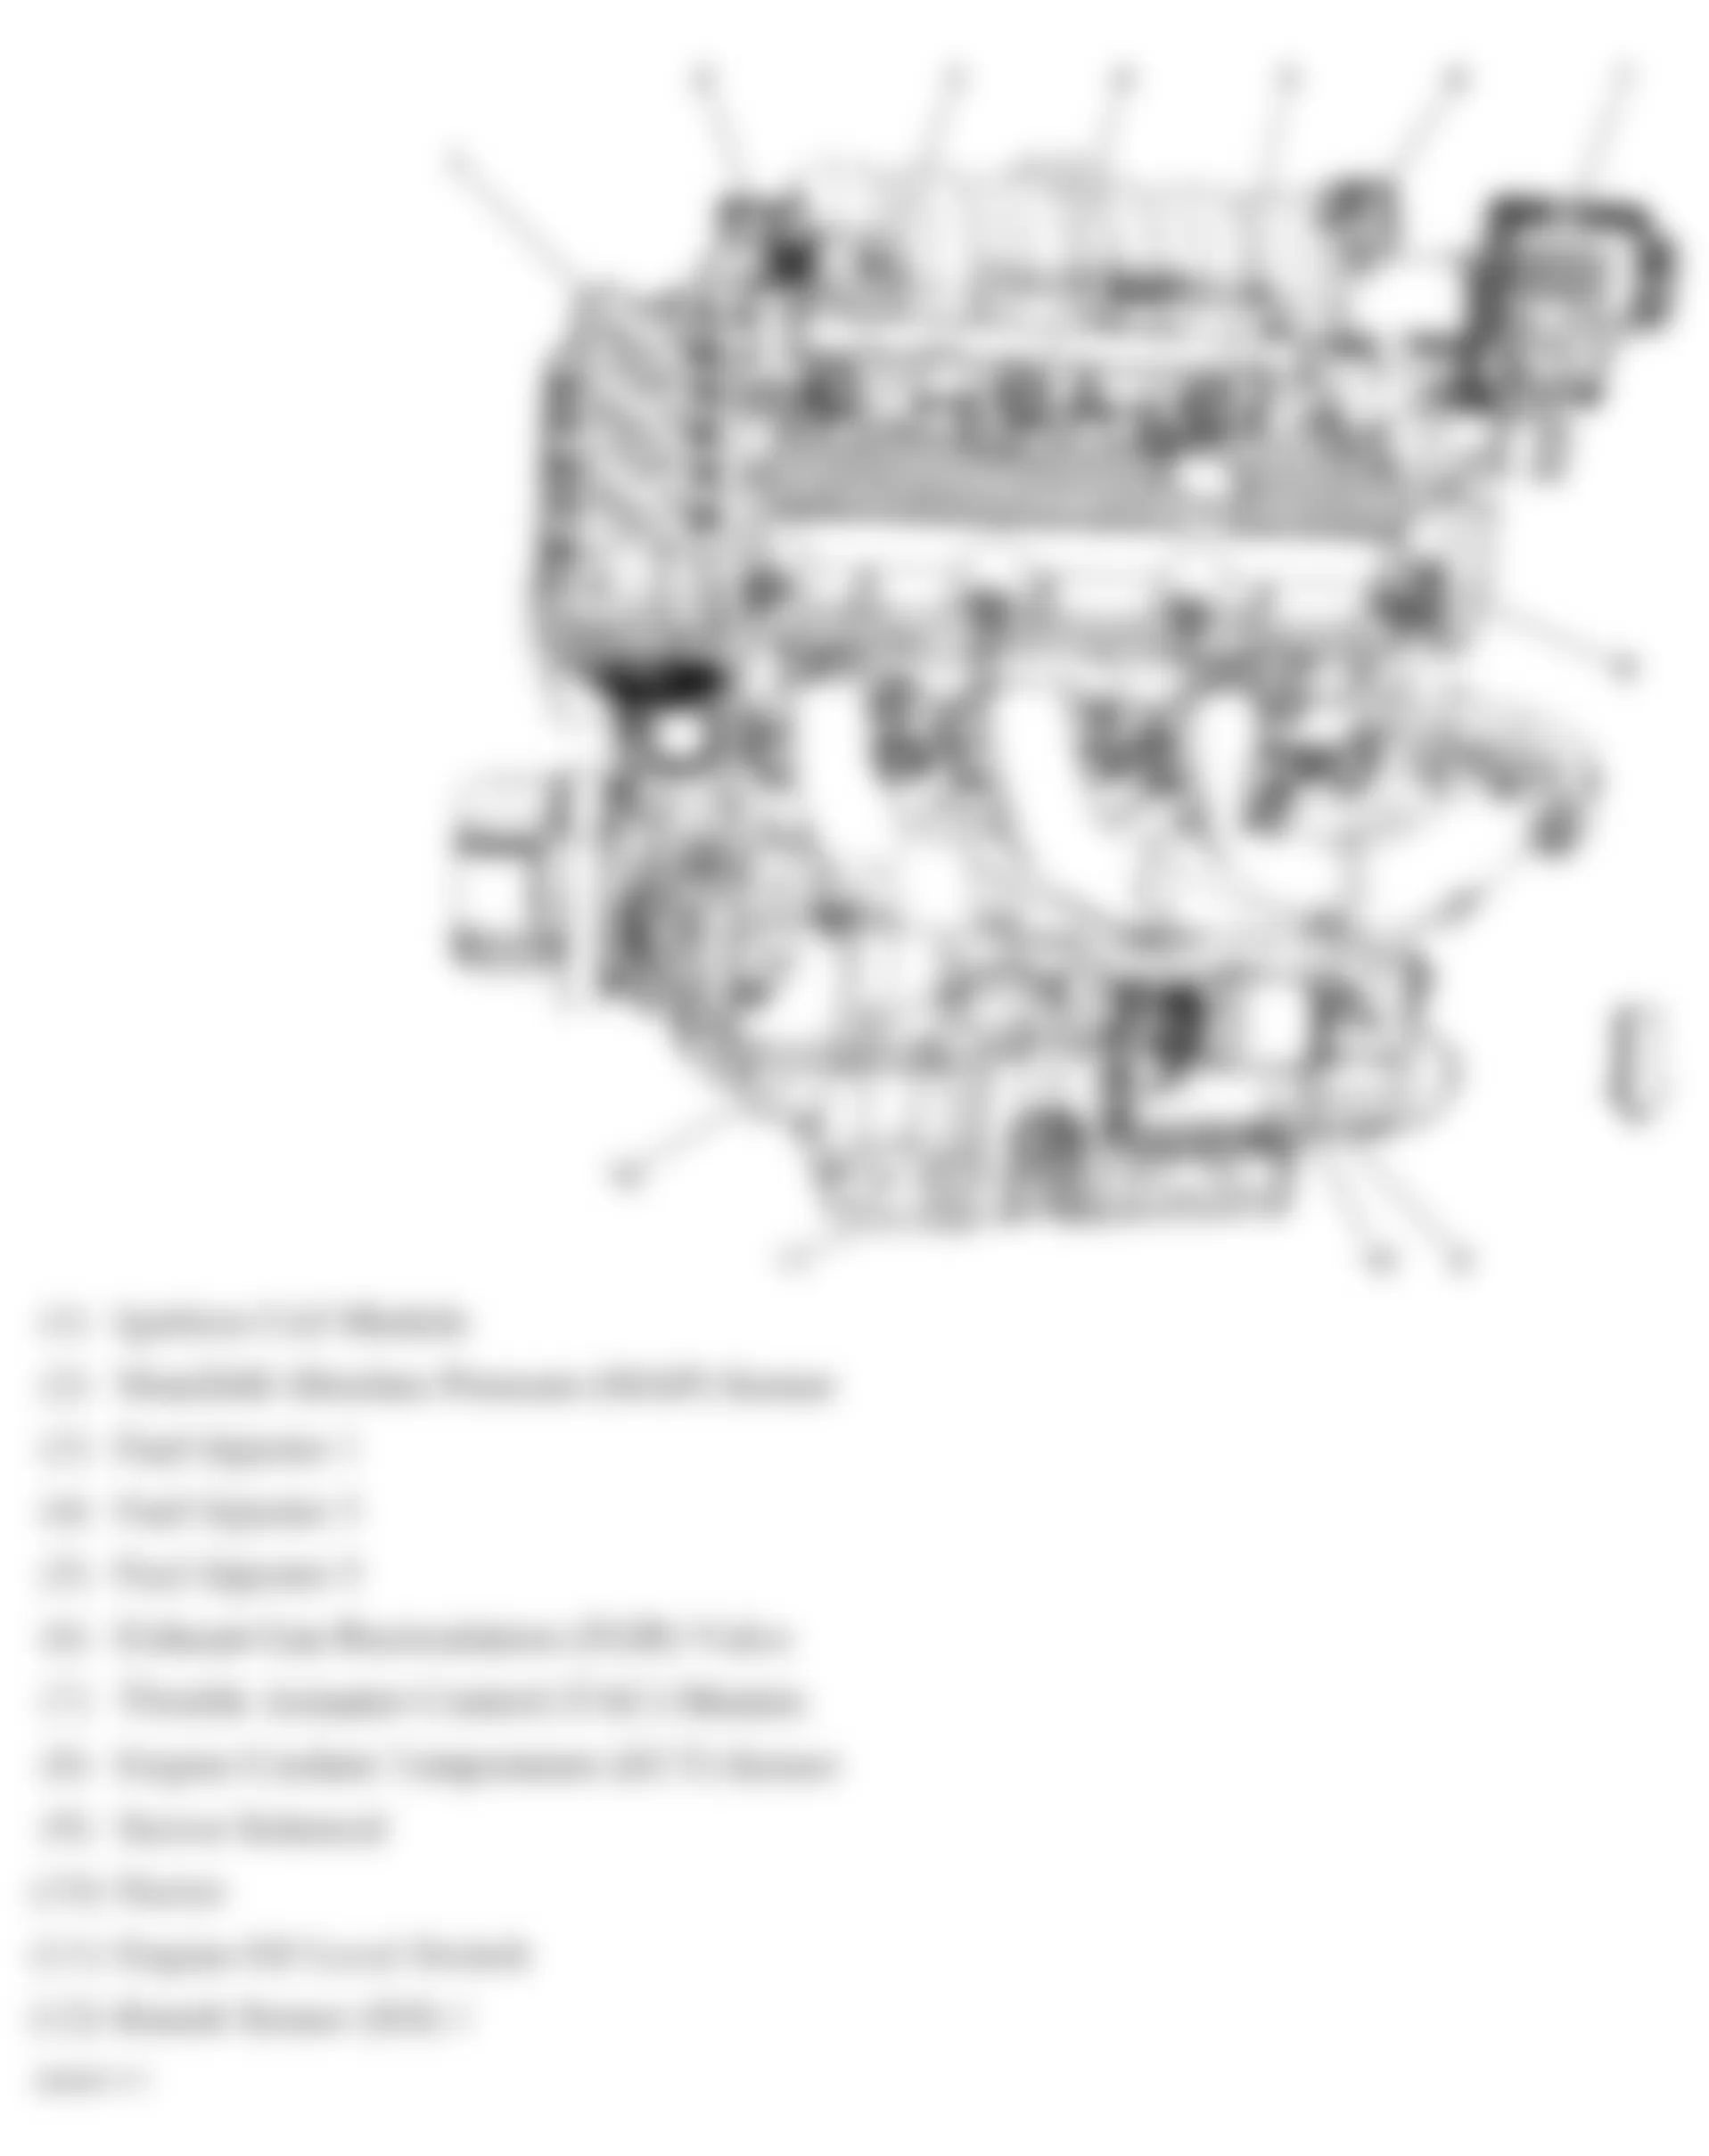 Buick Allure CXS 2008 - Component Locations -  Left Side Of Engine (3.8L)